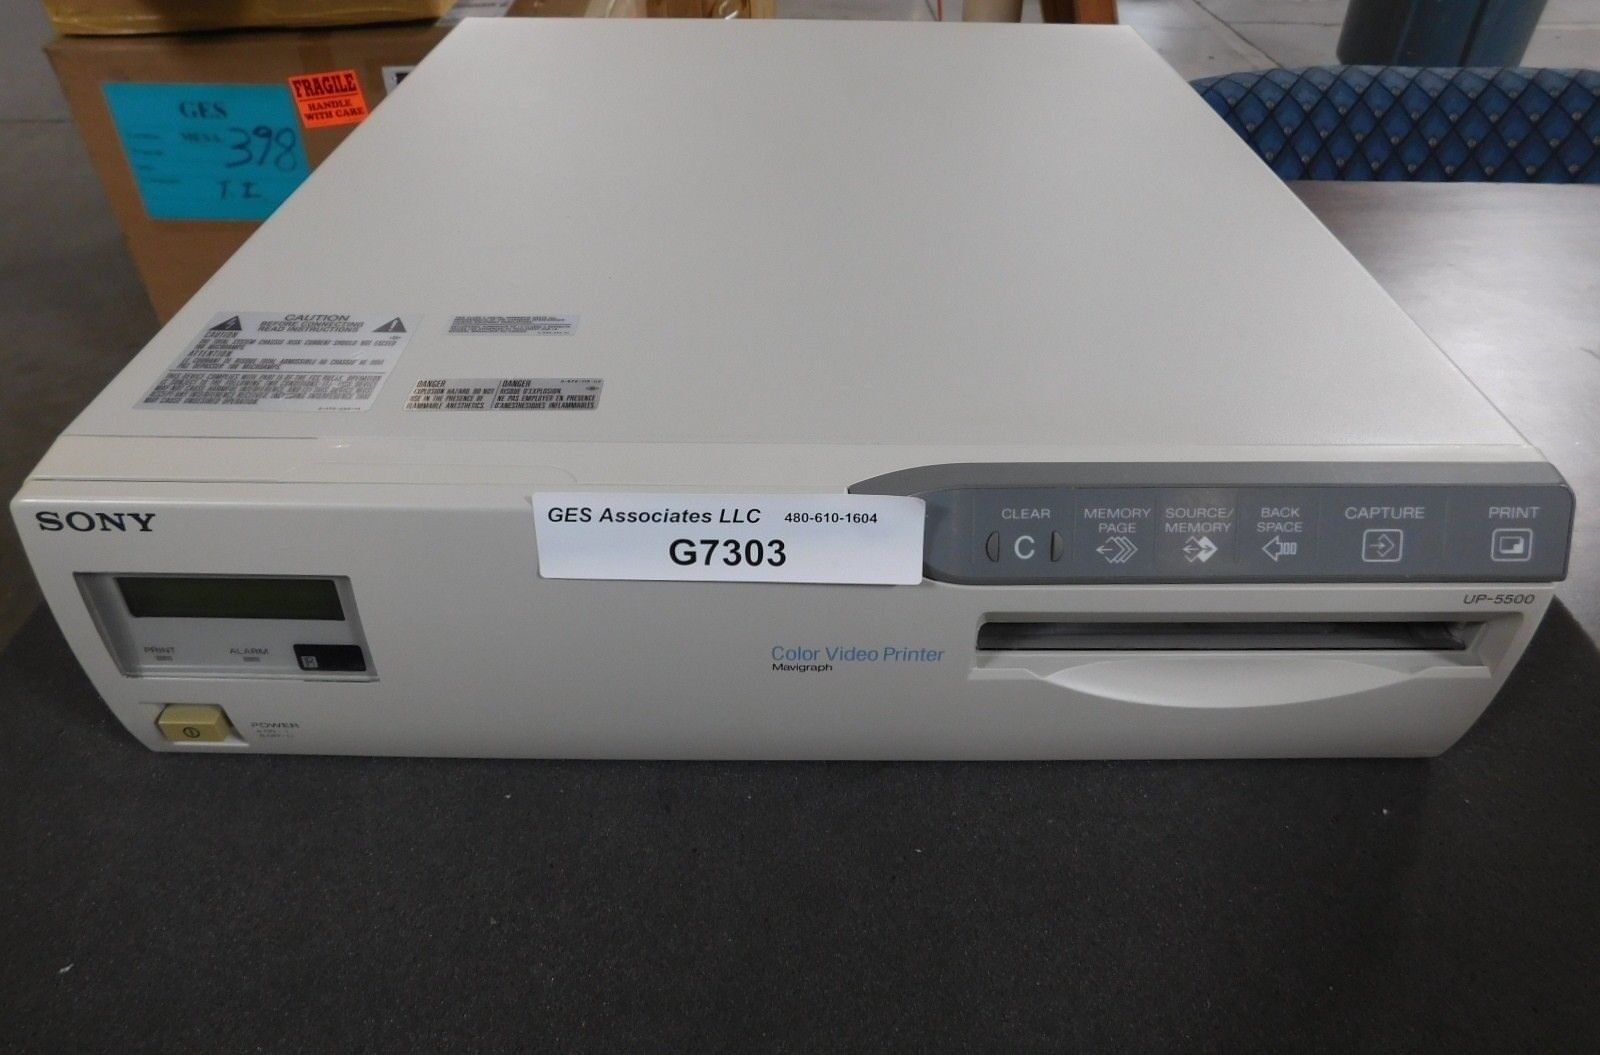 SONY UP-5500 Color Video Printer